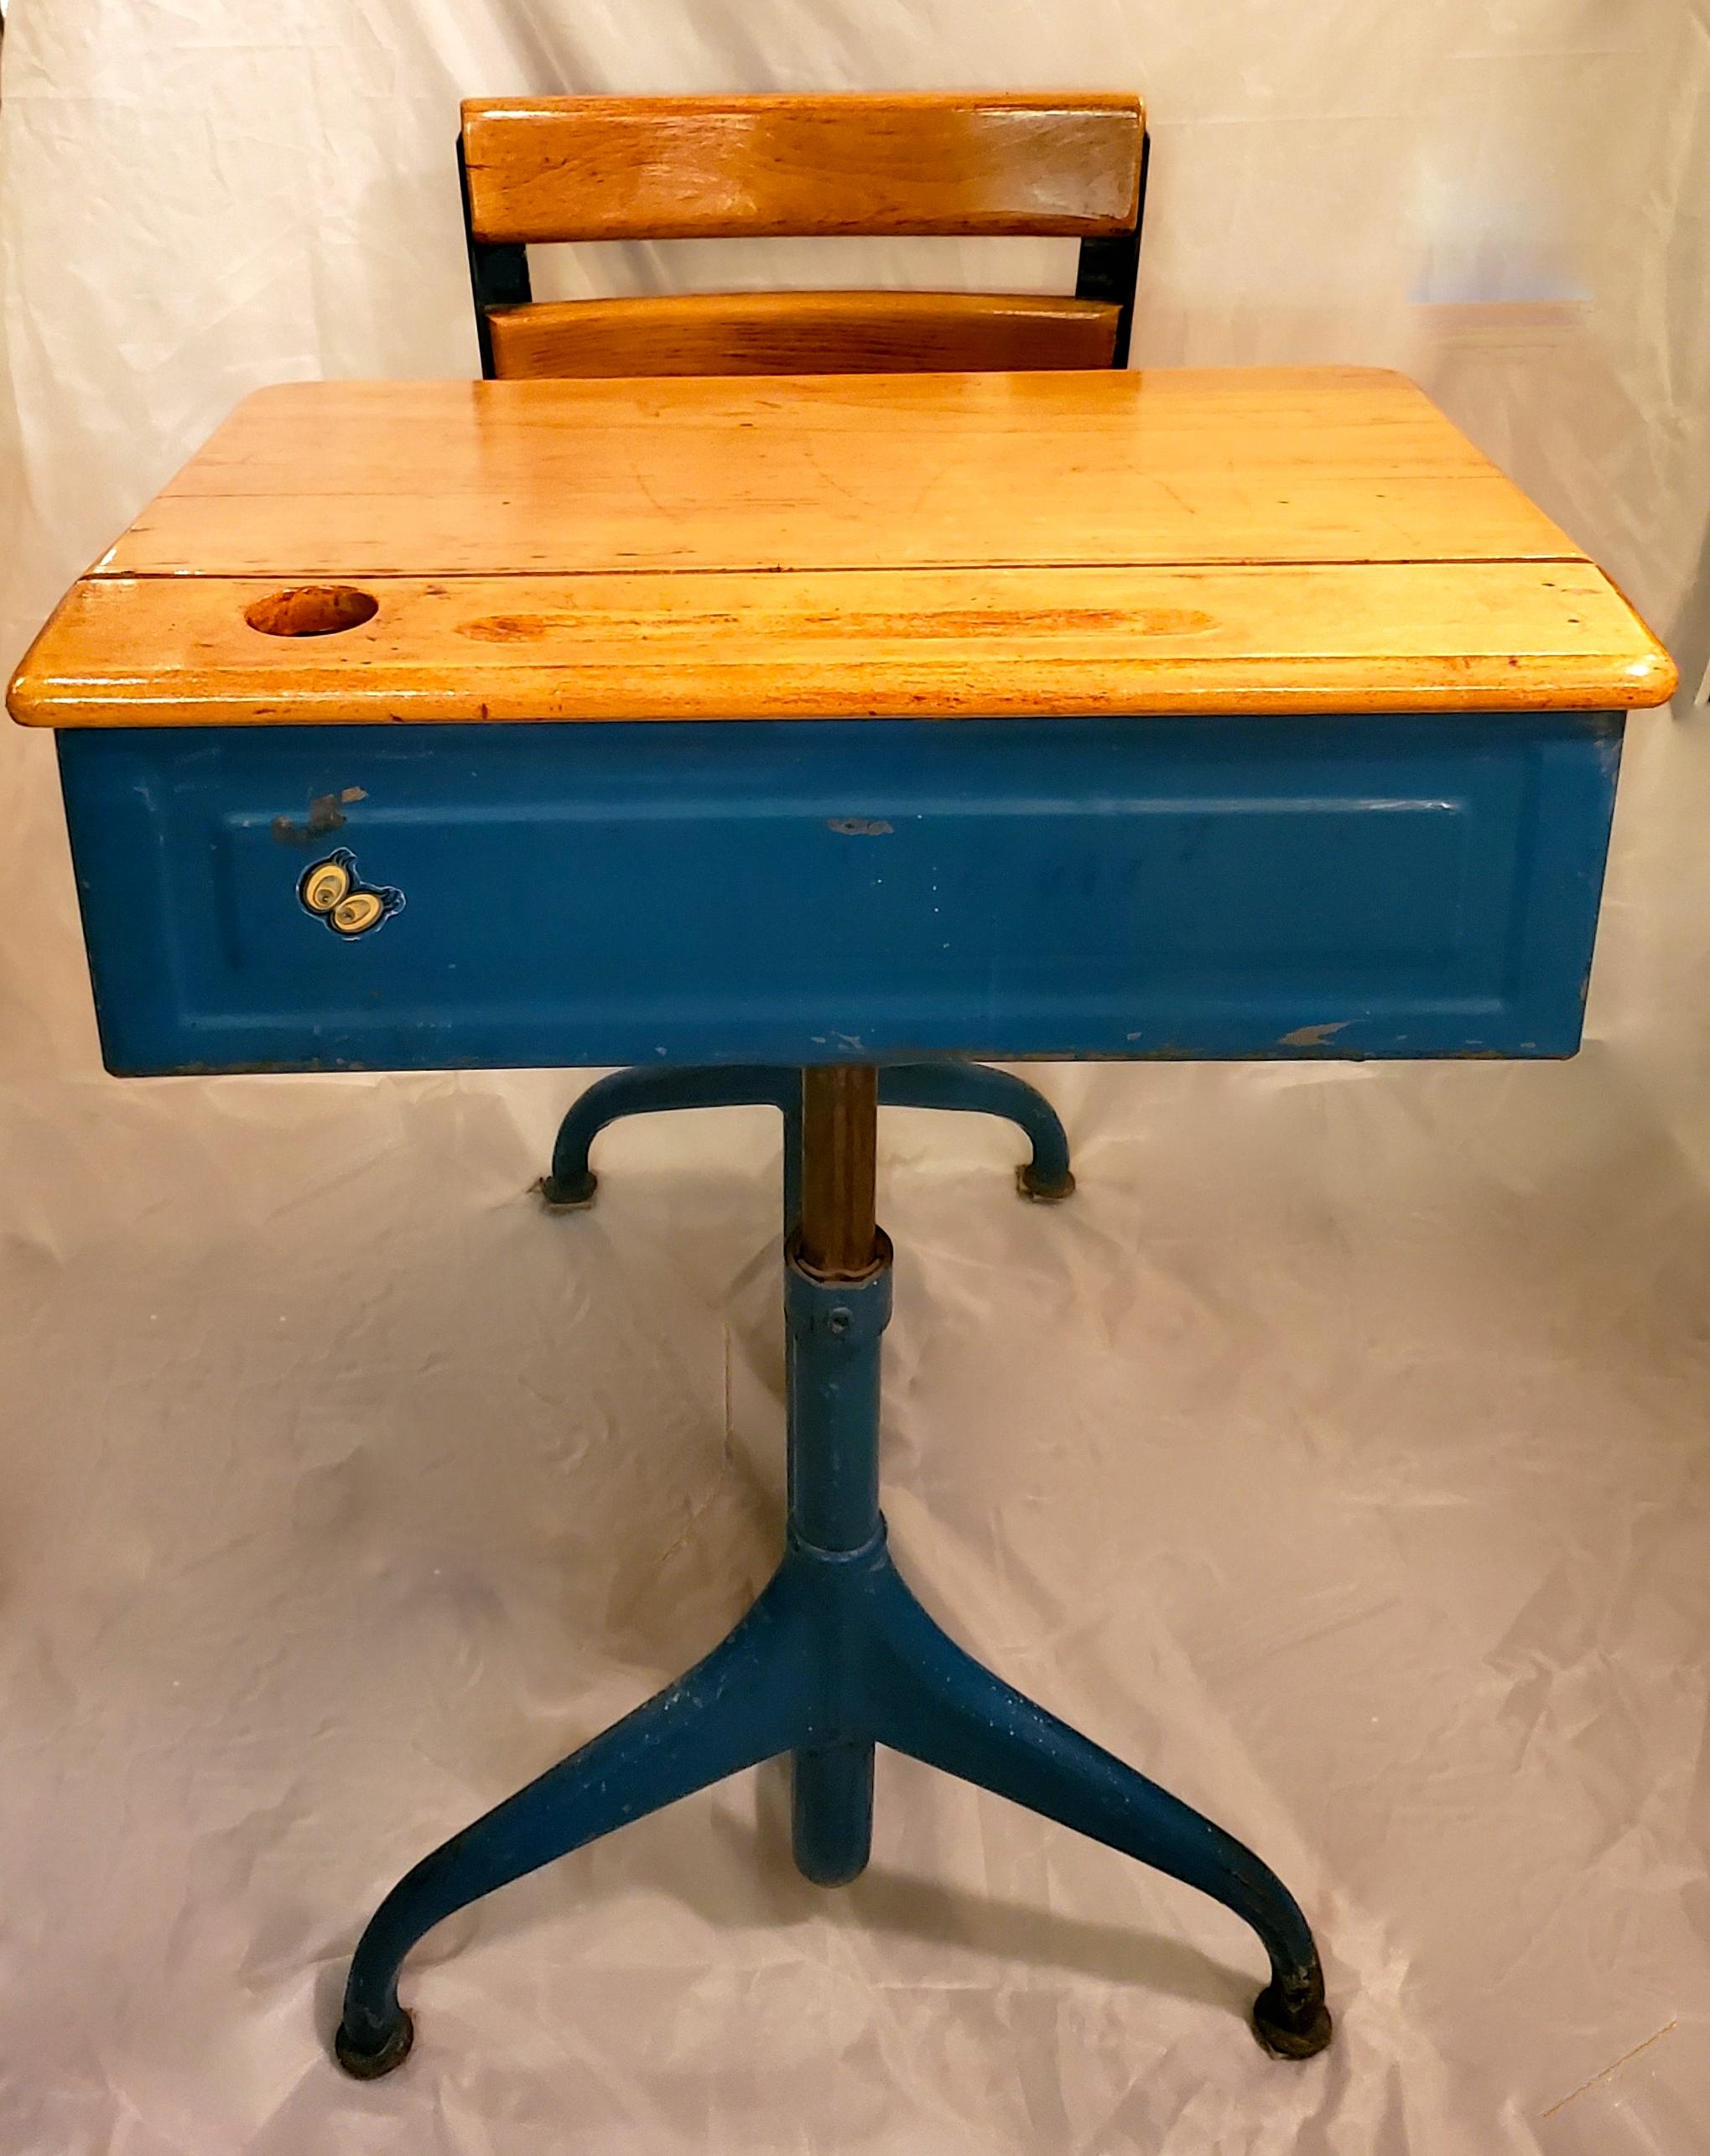 1950s Industrial Children S School Desk Chair For Sale At 1stdibs